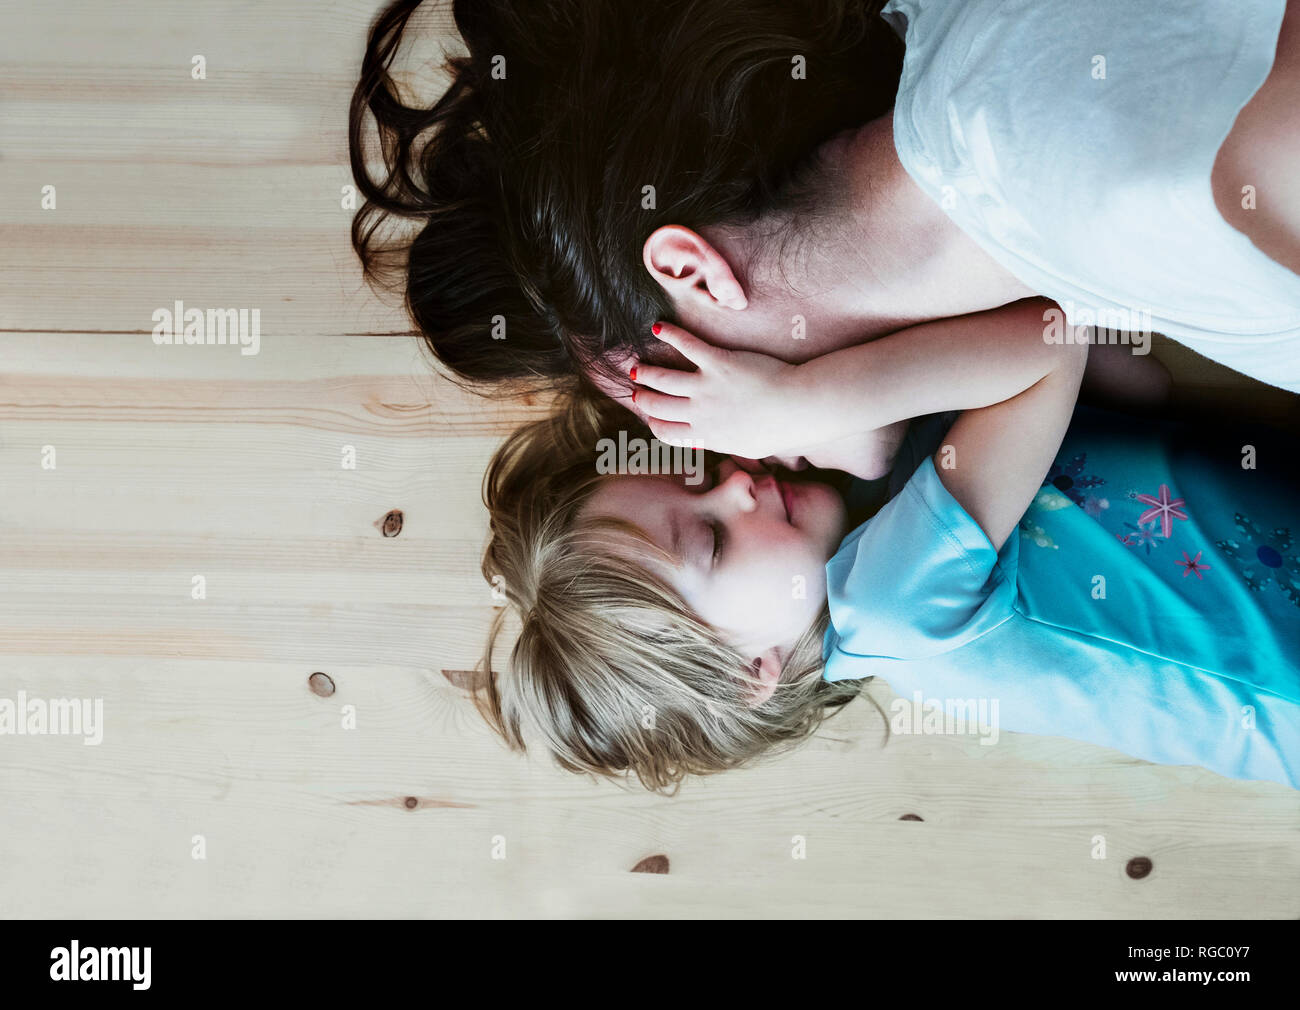 Daughter caressing mother, lying on floor Stock Photo